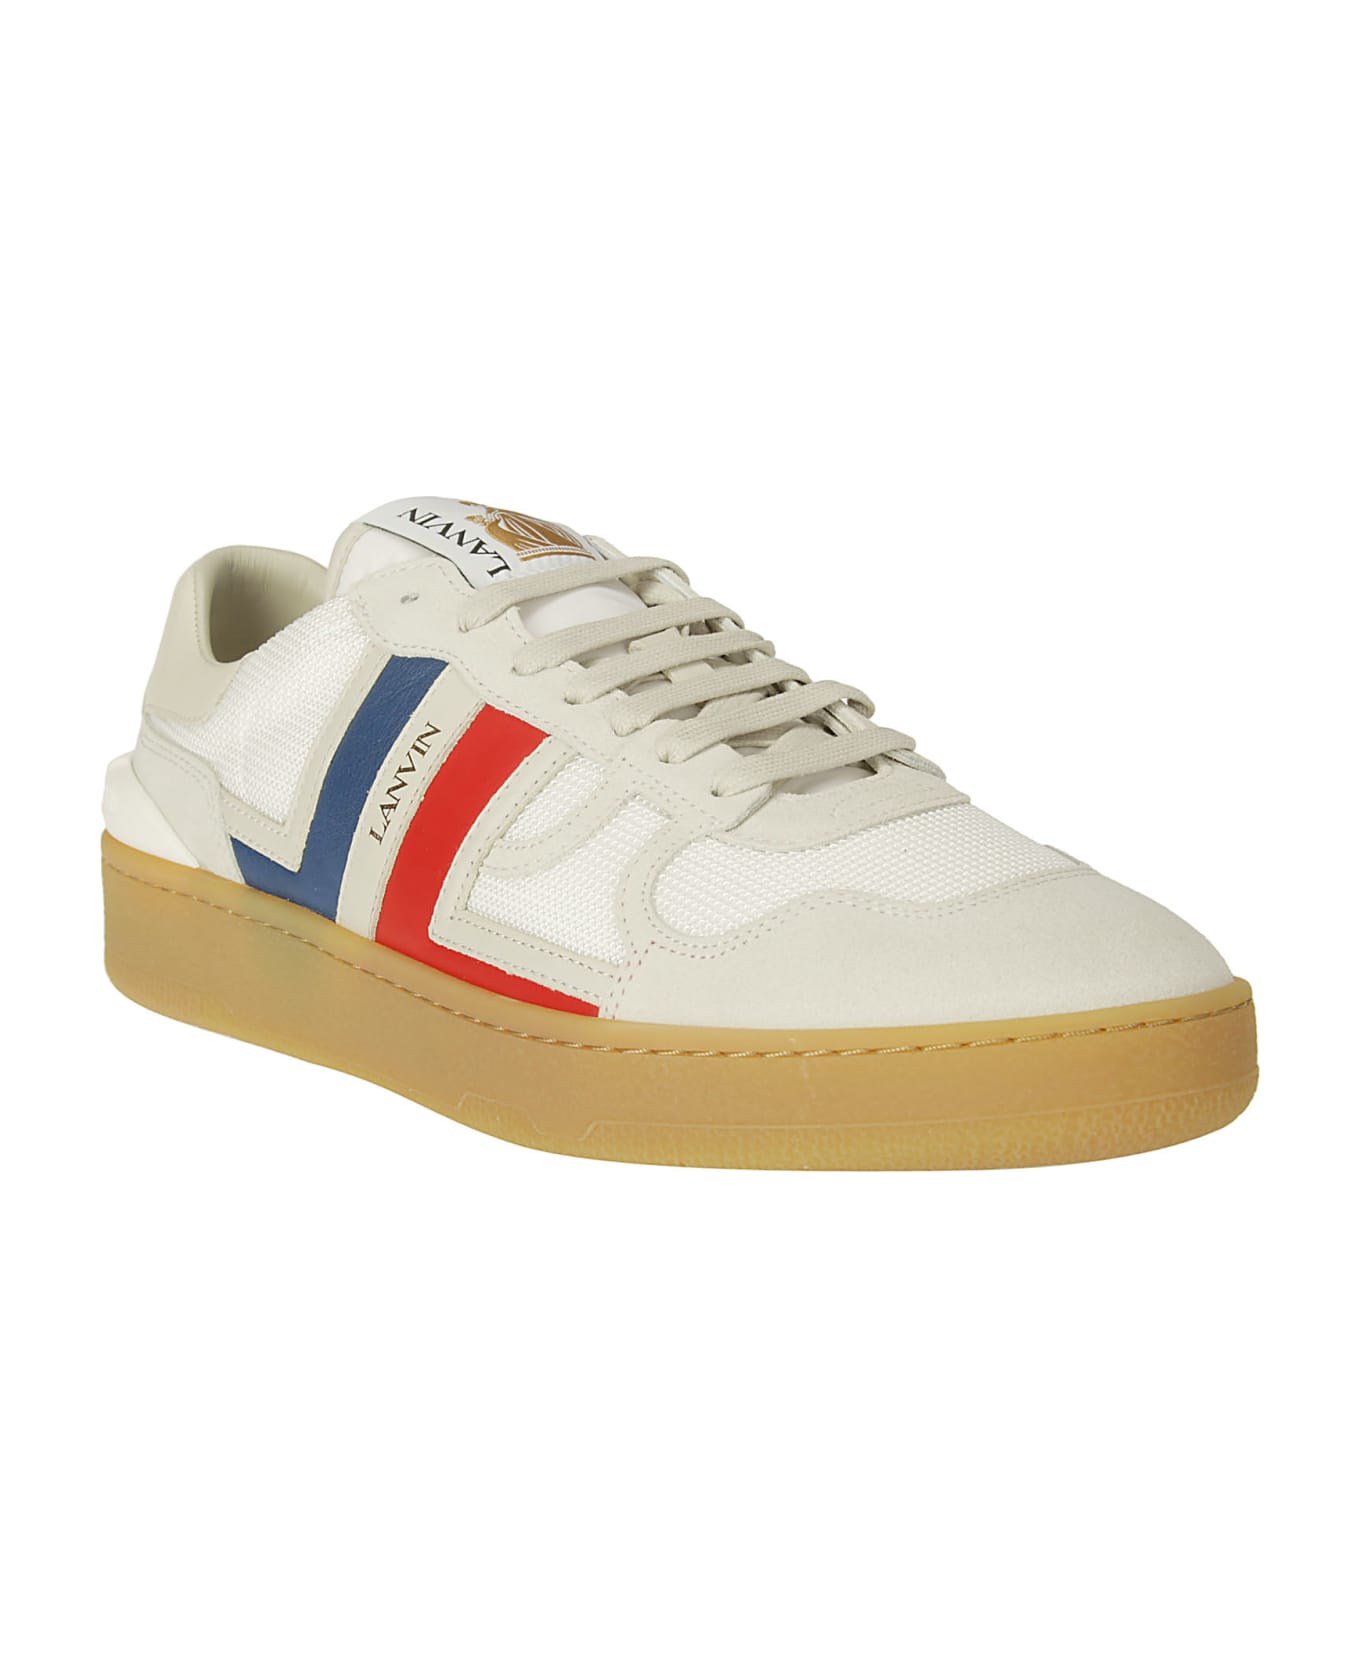 Lanvin Clay Low Top Sneakers - WHITE/MULTICOLOUR